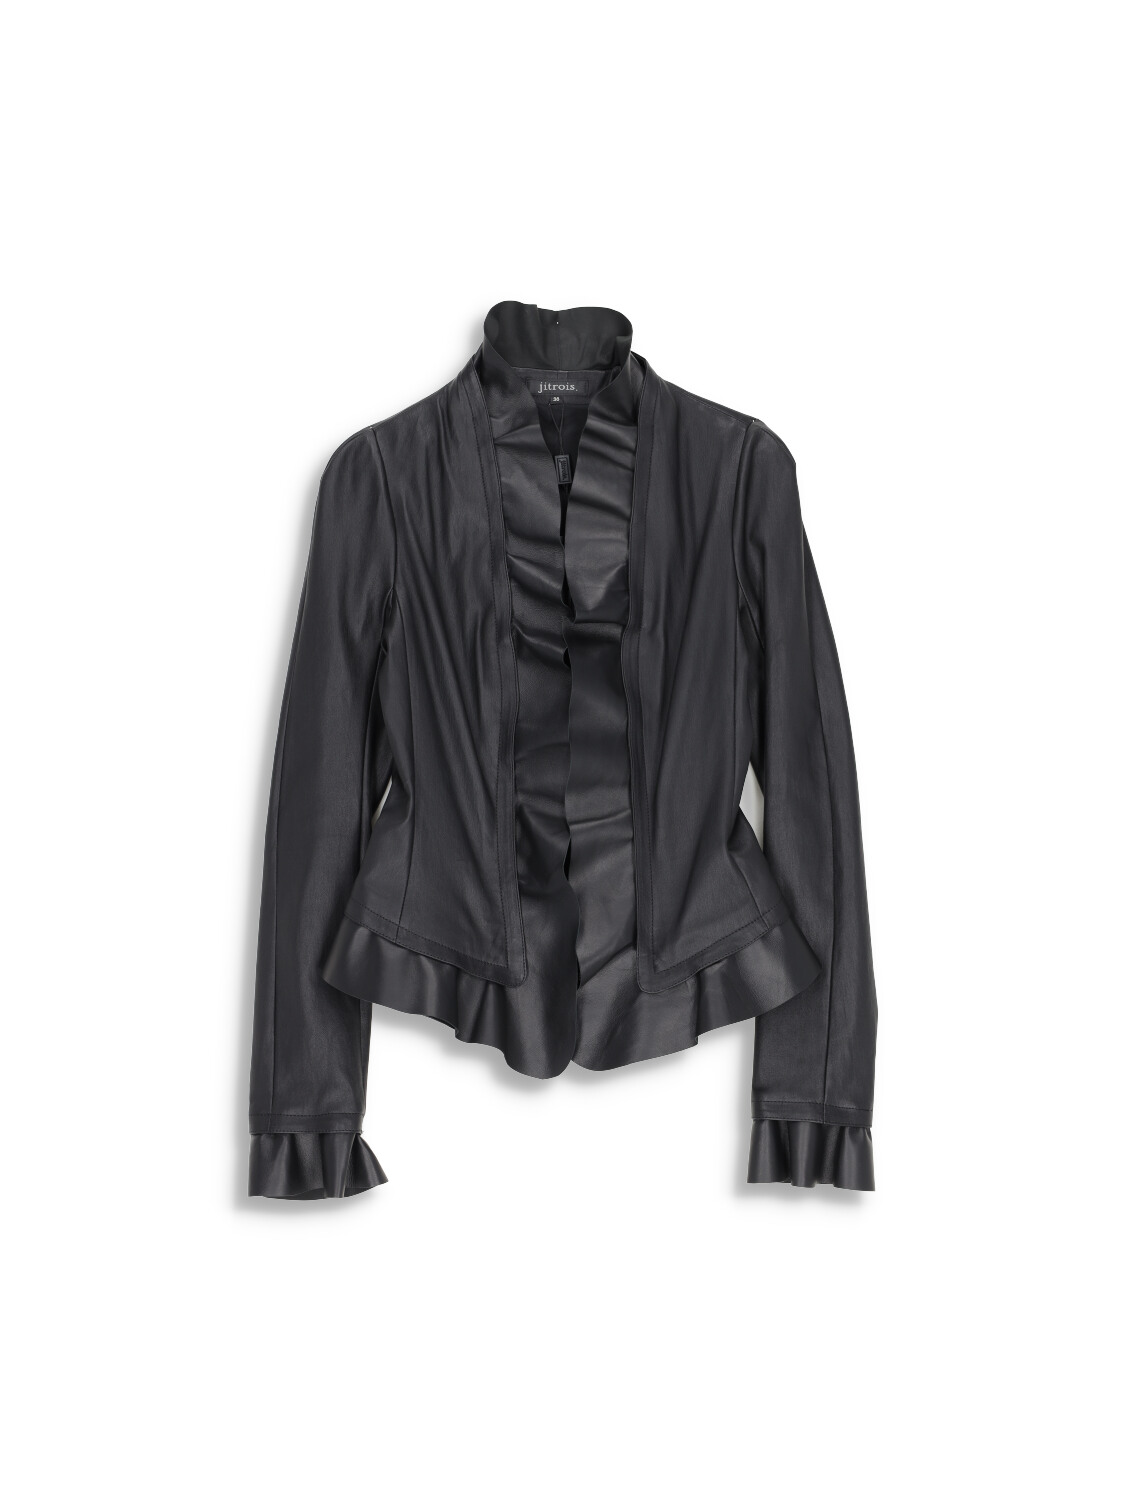 jitrois Blouson Jagger - jacket with ruffle details in lamb leather black 40